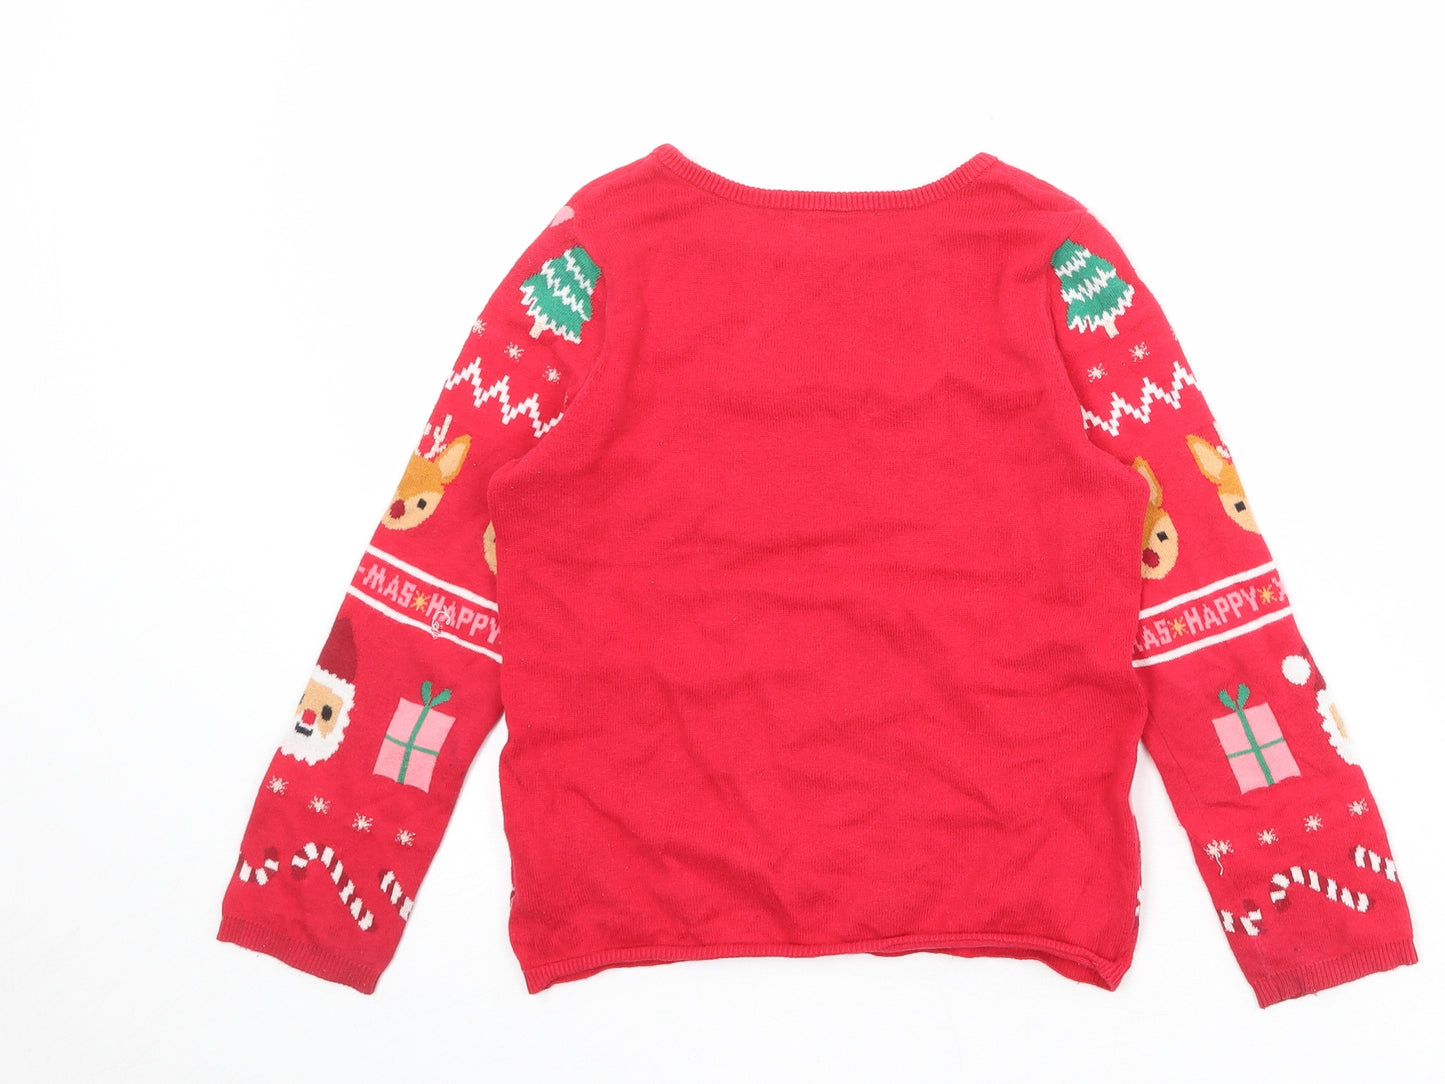 H&M Boys Red Round Neck Geometric Cotton Pullover Jumper Size 6-7 Years Pullover - Size 6-8 Years Christmas